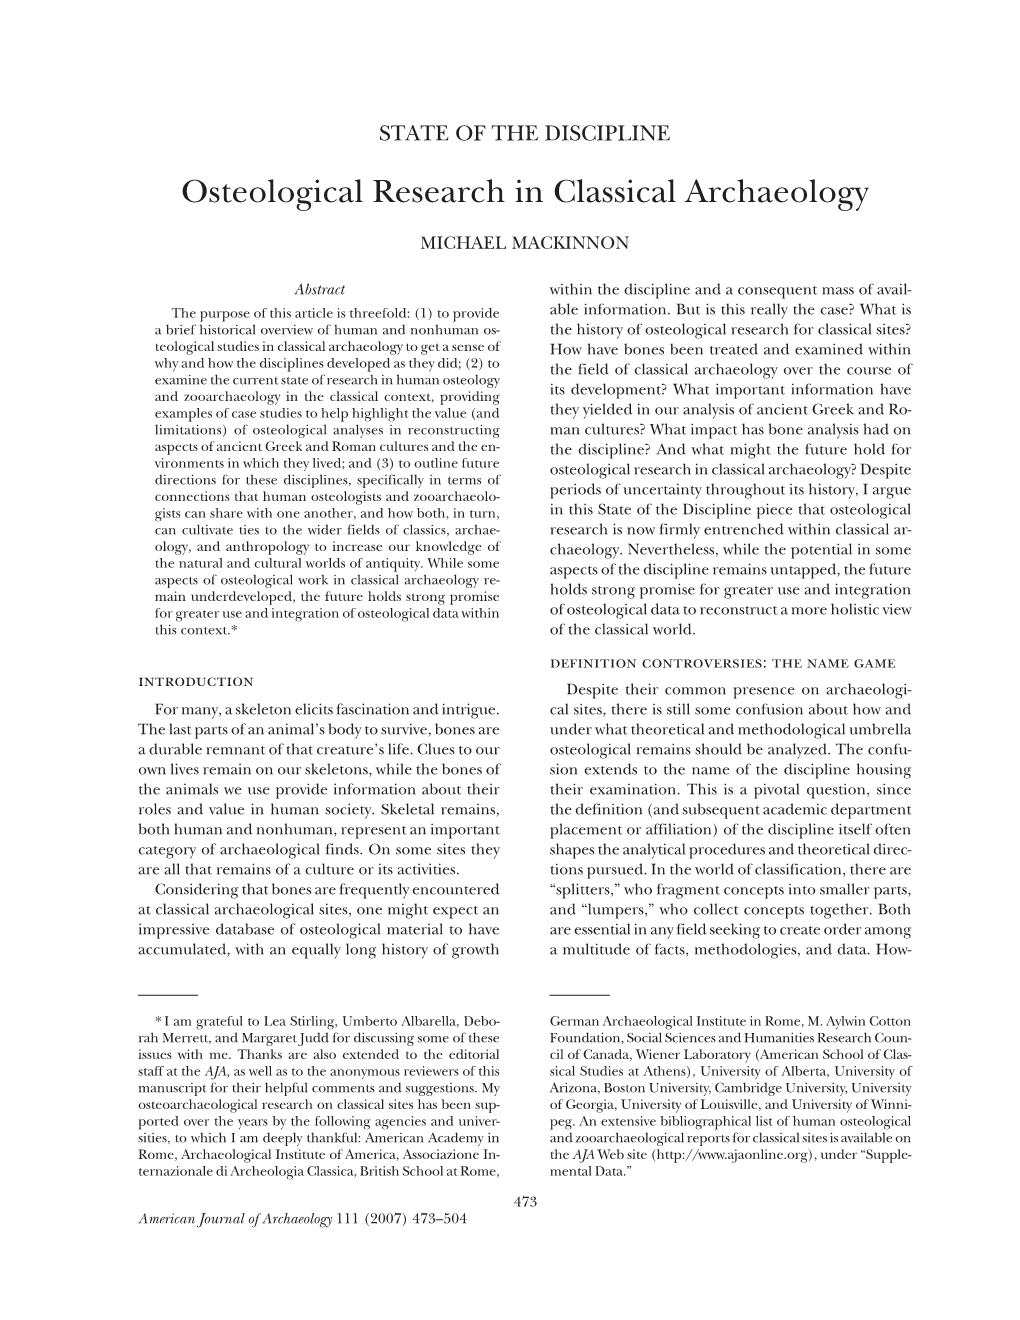 Osteological Research in Classical Archaeology